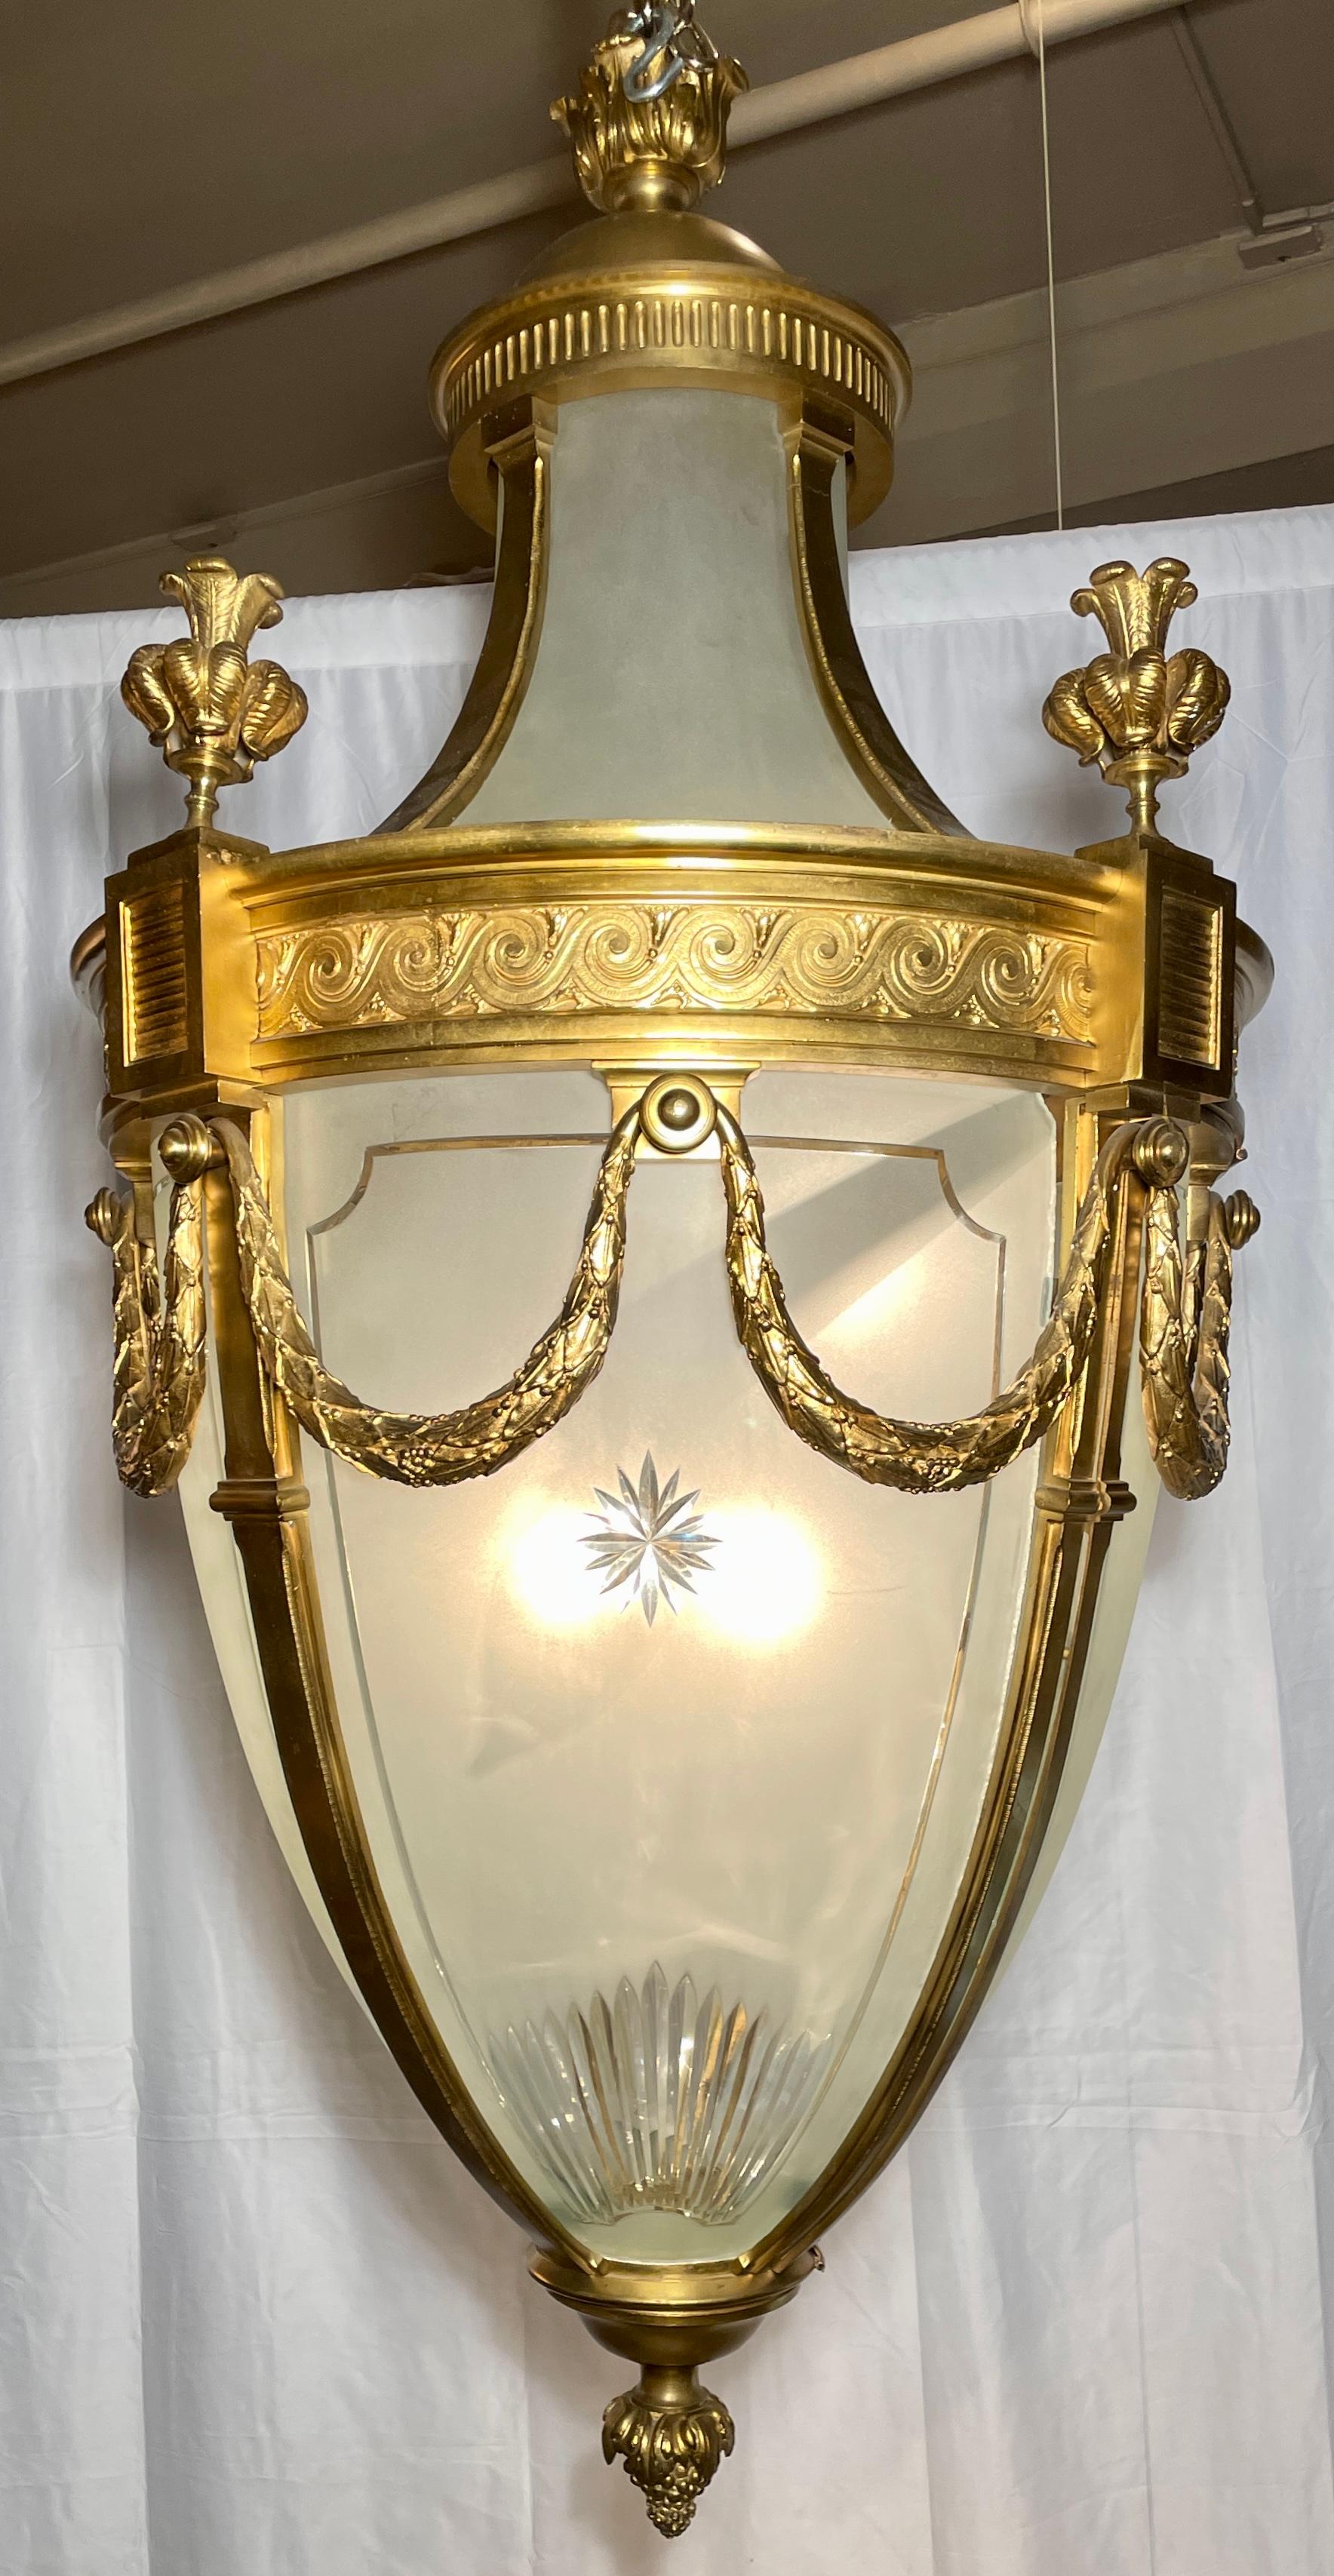 Grand Scale Antique French Belle Époque Gold Bronze & Etched Glass Lantern, circa 1890.
Magnificent design with intricate gold bronze and wheel carving.